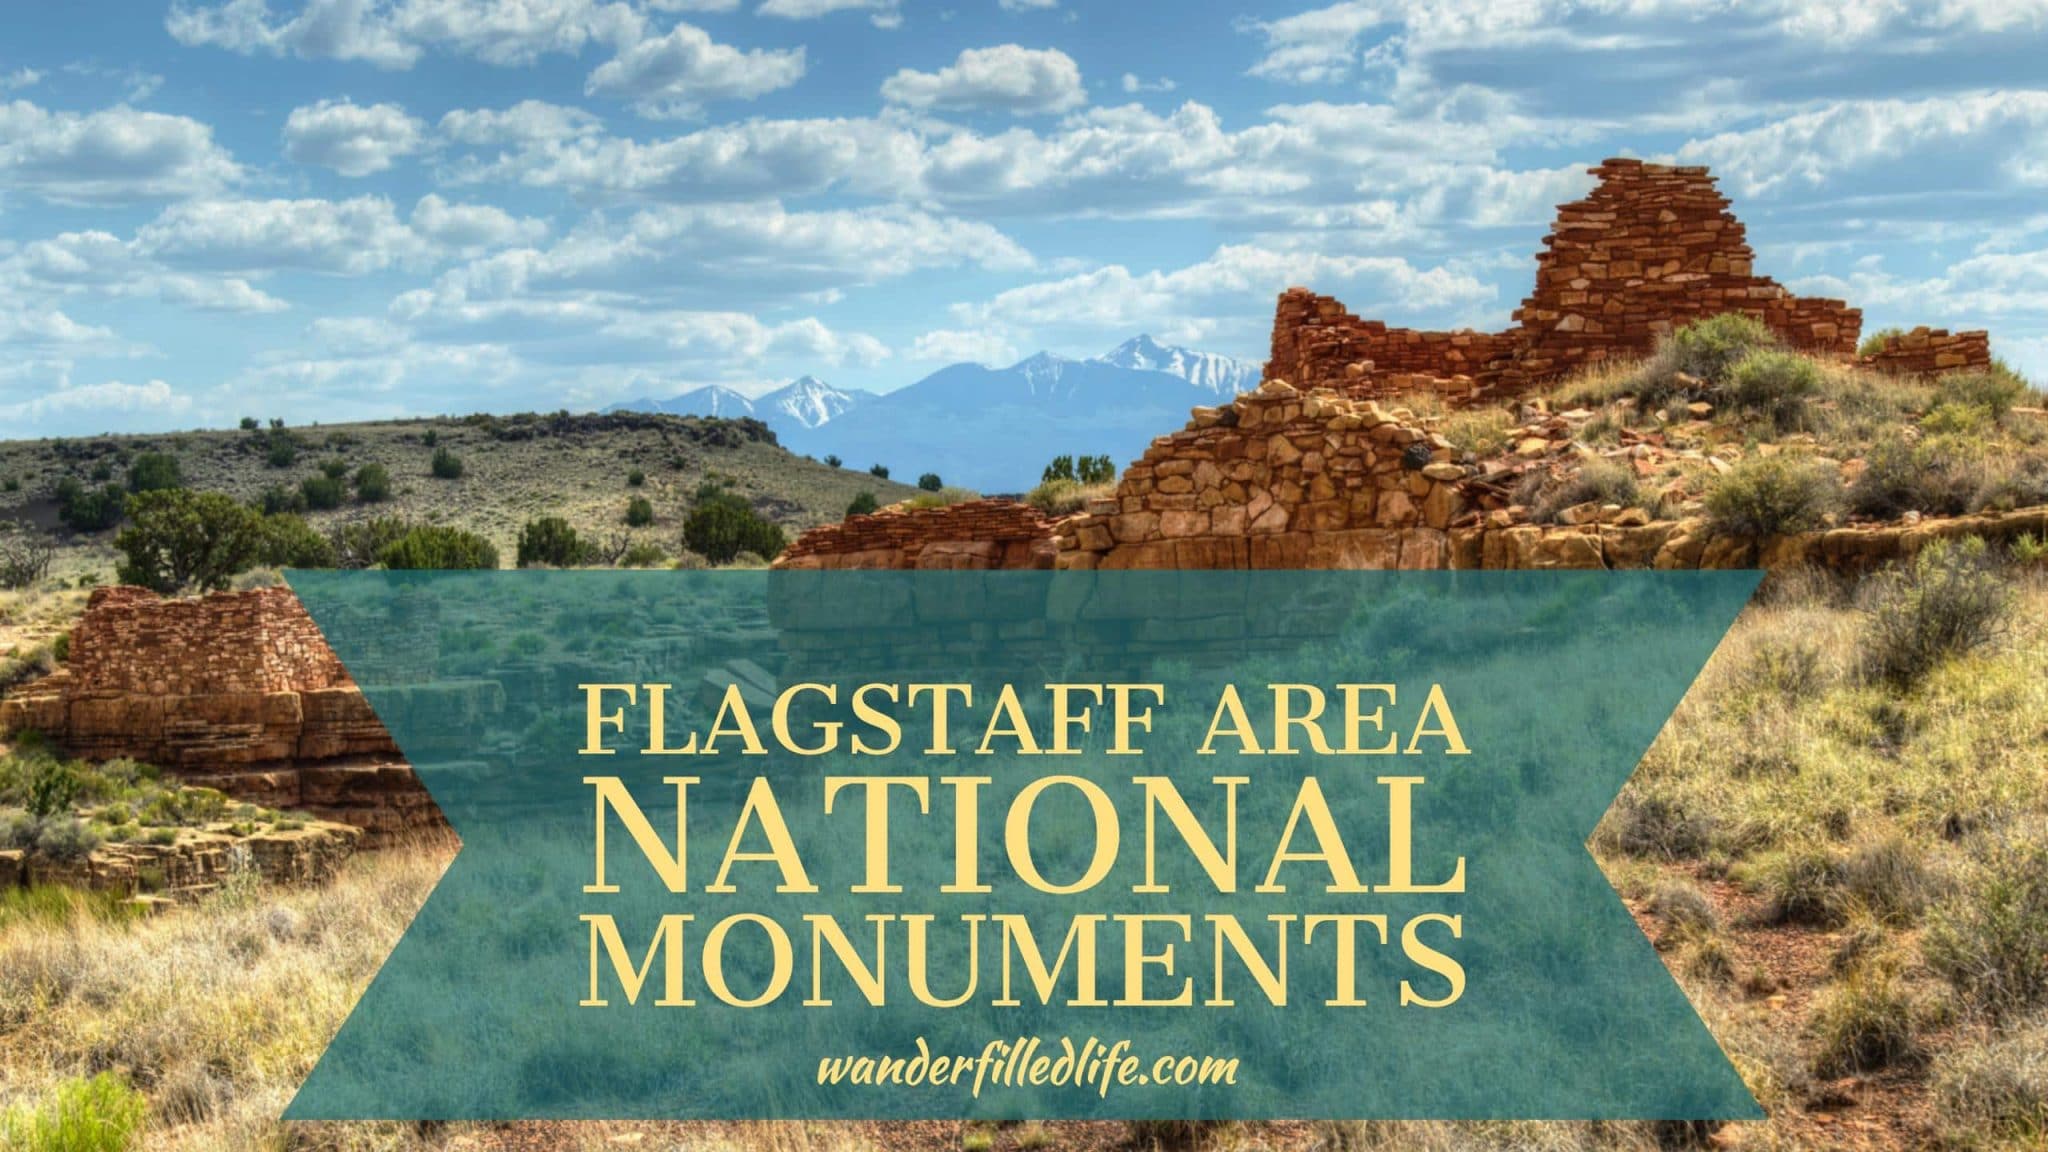 Visiting the Flagstaff Area National Monuments